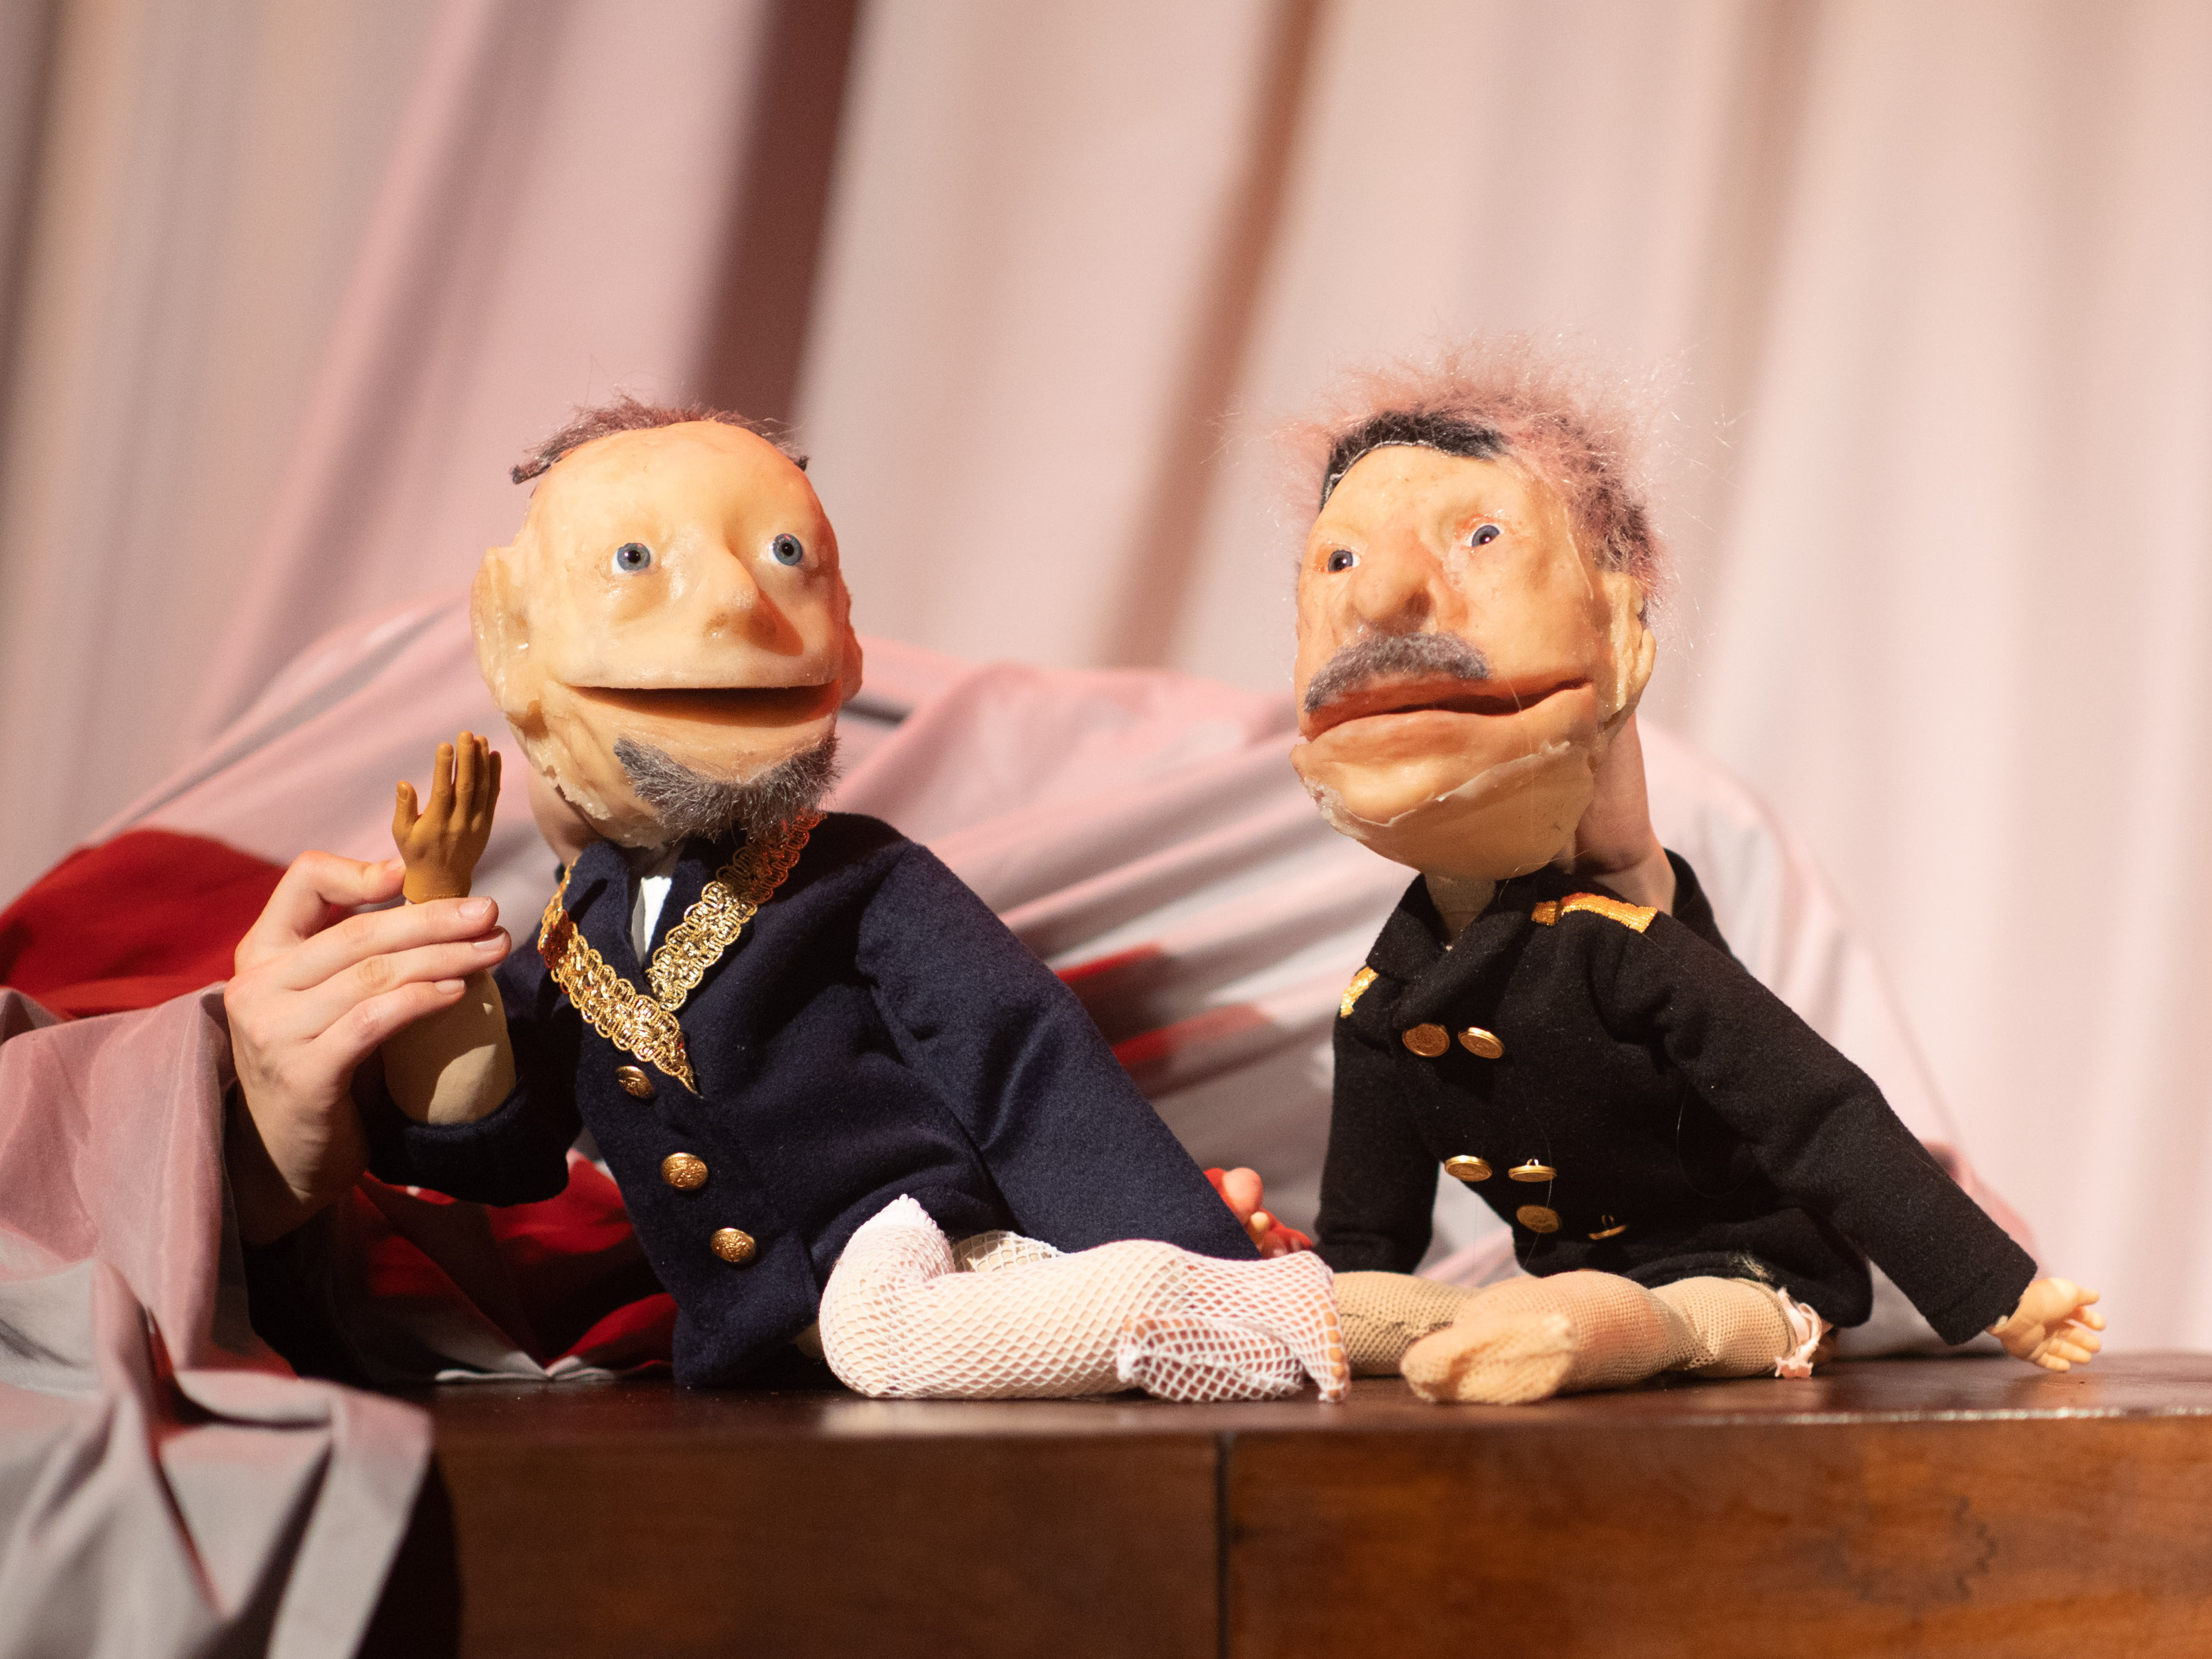 The puppets of two uniformed old men sit on a piece of wooden furniture. The two wear different beards and have gray hair. One of them has a bandage on his leg.